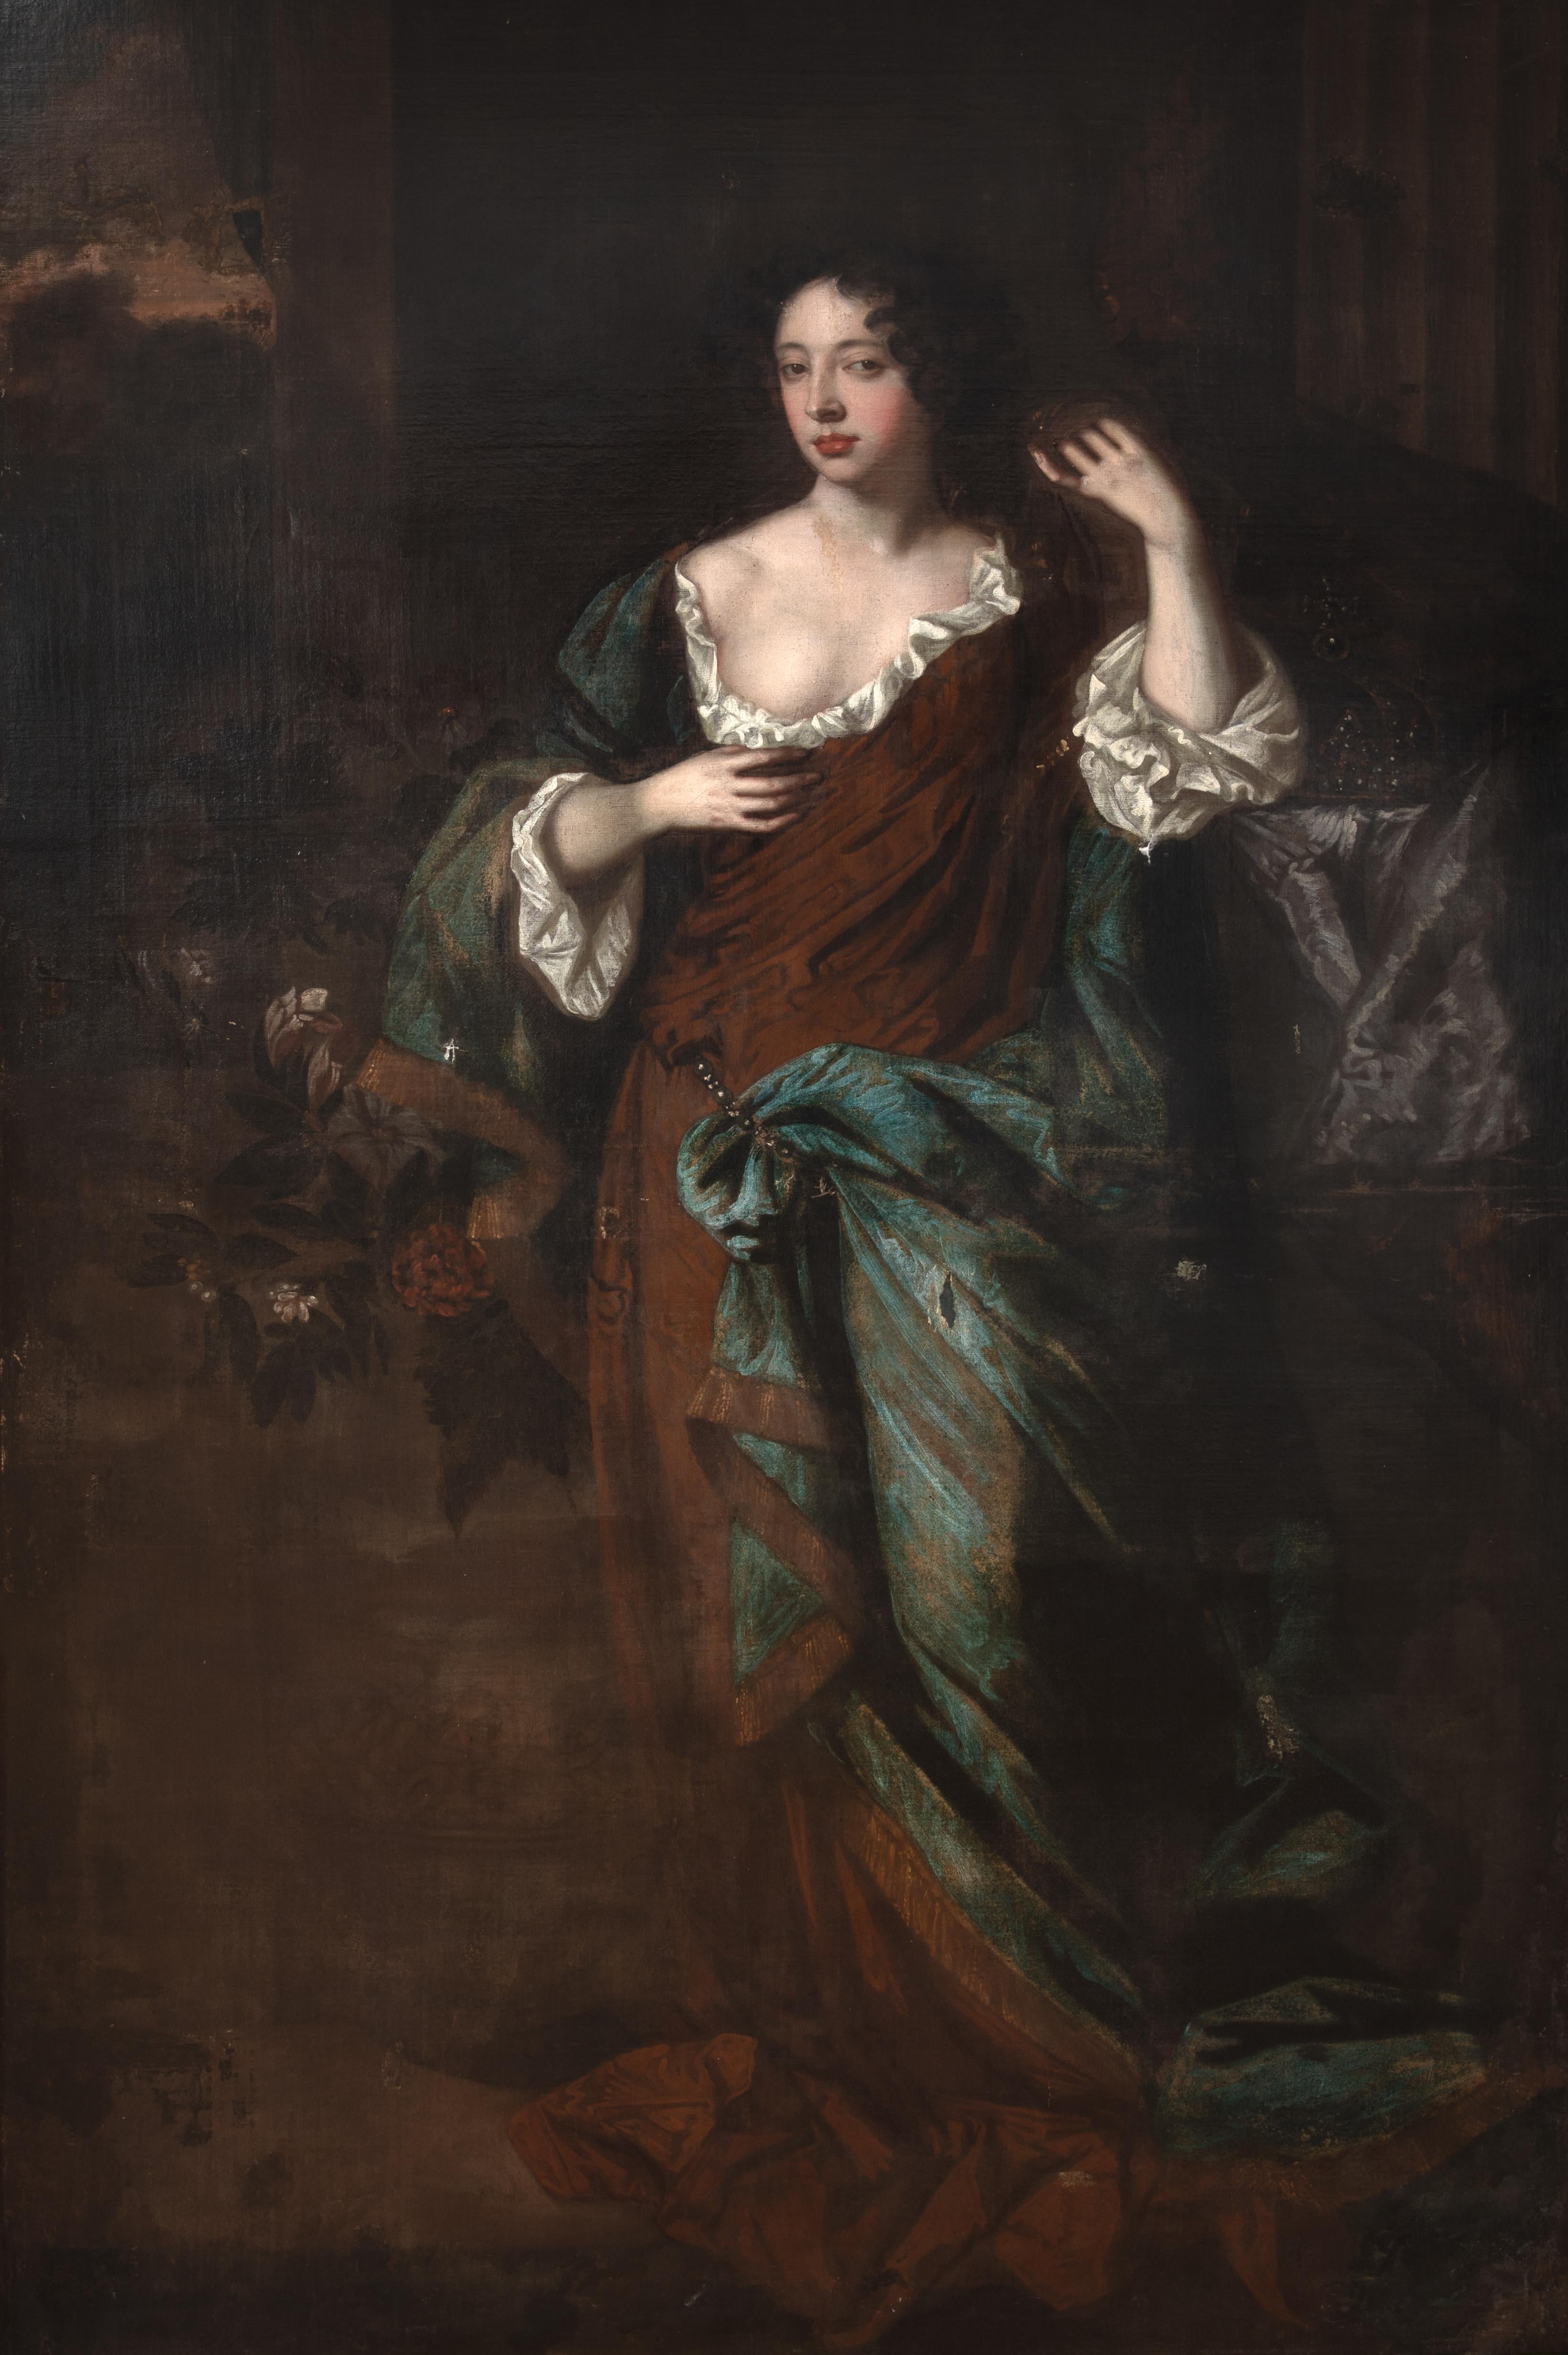 Portrait Of Mary Of Modena, Queen Of England, 17th Century

Studio Of SIR PETER LELY (1618-1680)

Huge 17th century English Old Master portrait of Mary Of Modena, Queen Of England, oil on canvas. Huge full length portrait of the second wife to James